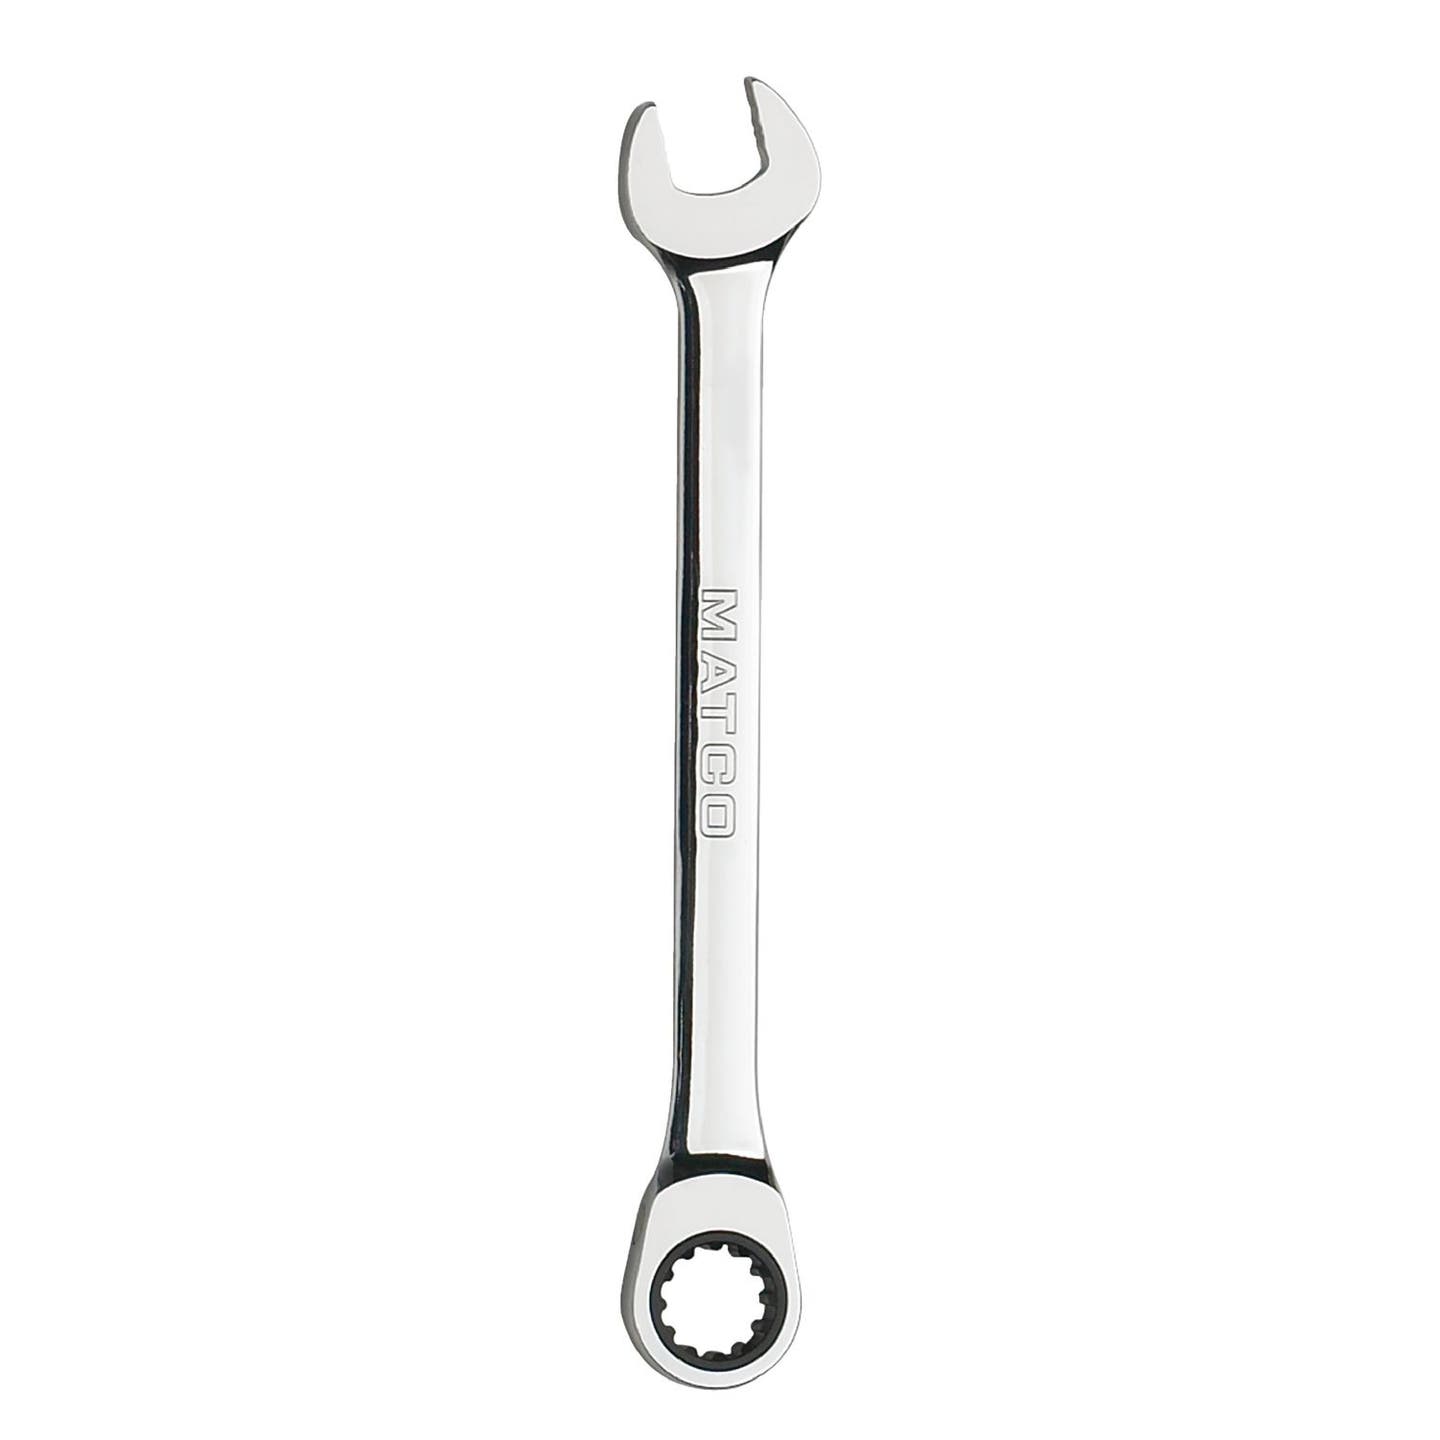 1/2" 90 TEETH COMBINATION RATCHETING WRENCH